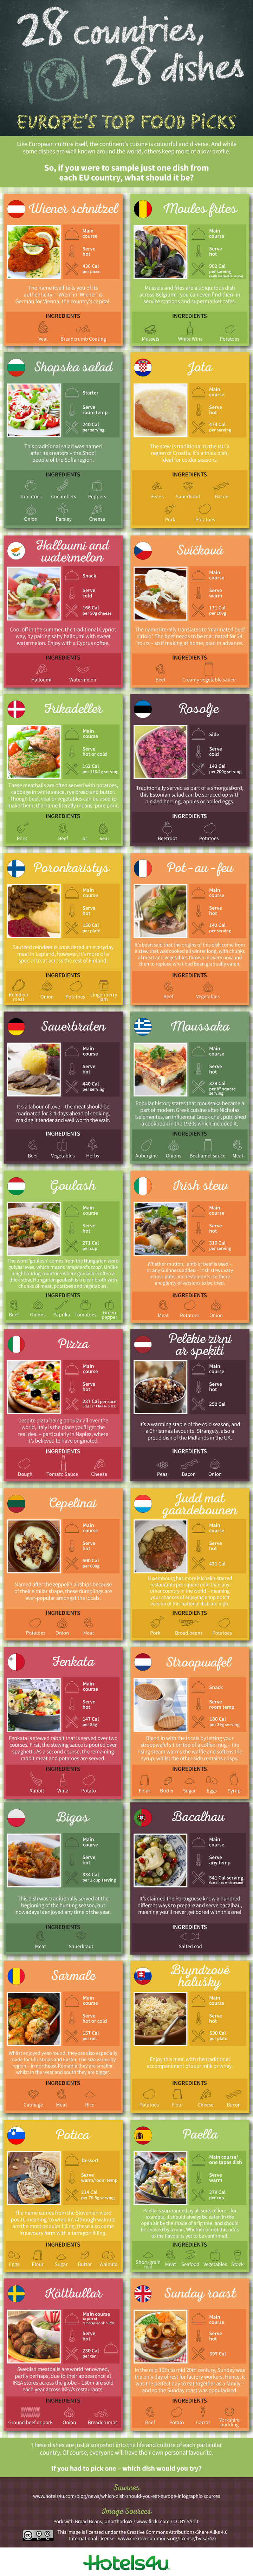 28 Countries, 28 Dishes – Europe’s Top Food Picks